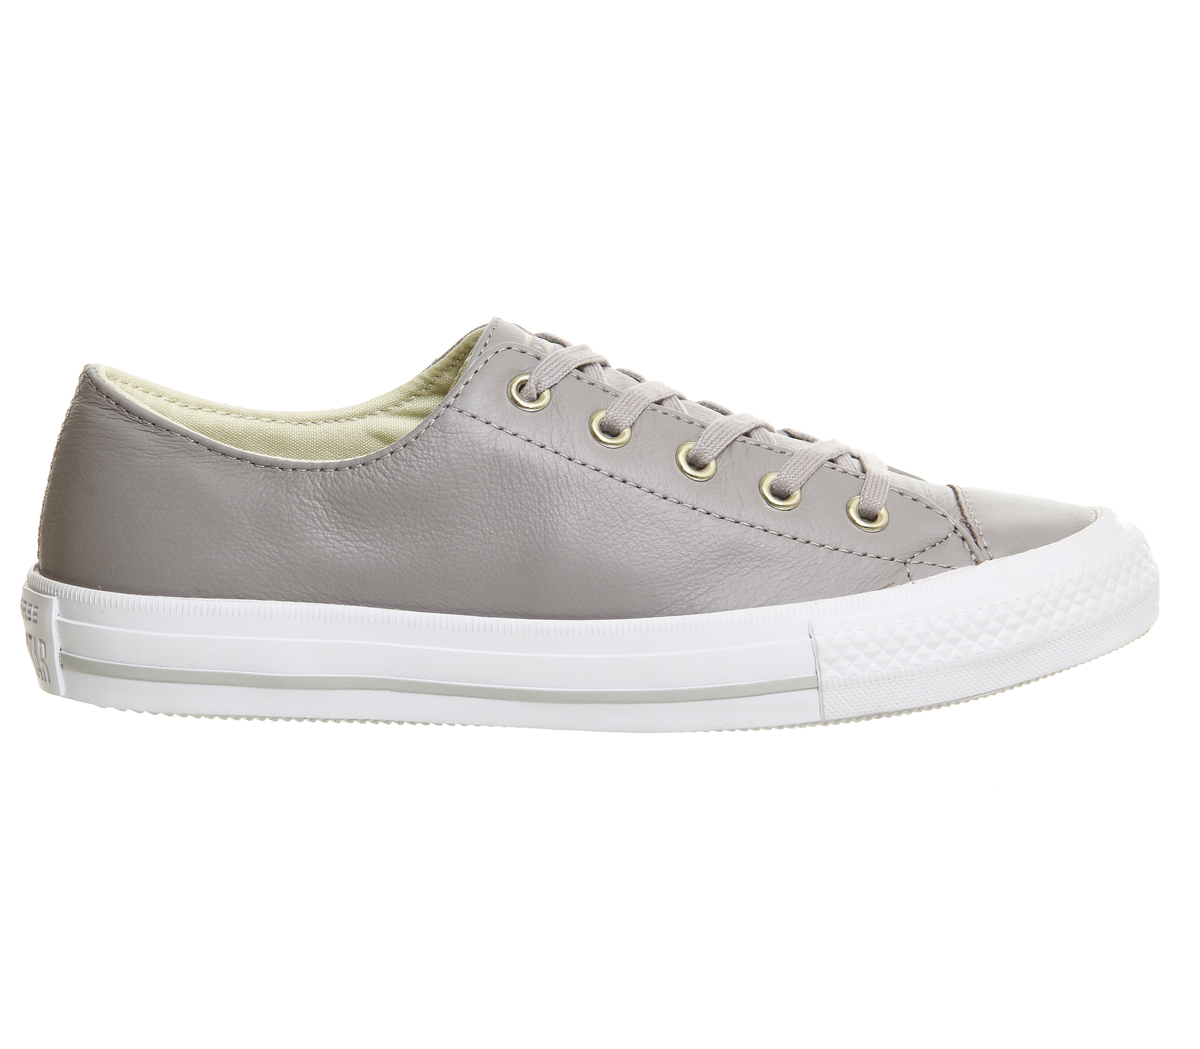 Converse Ctas Gemma Low Leather Gull Grey Pewter - Hers trainers